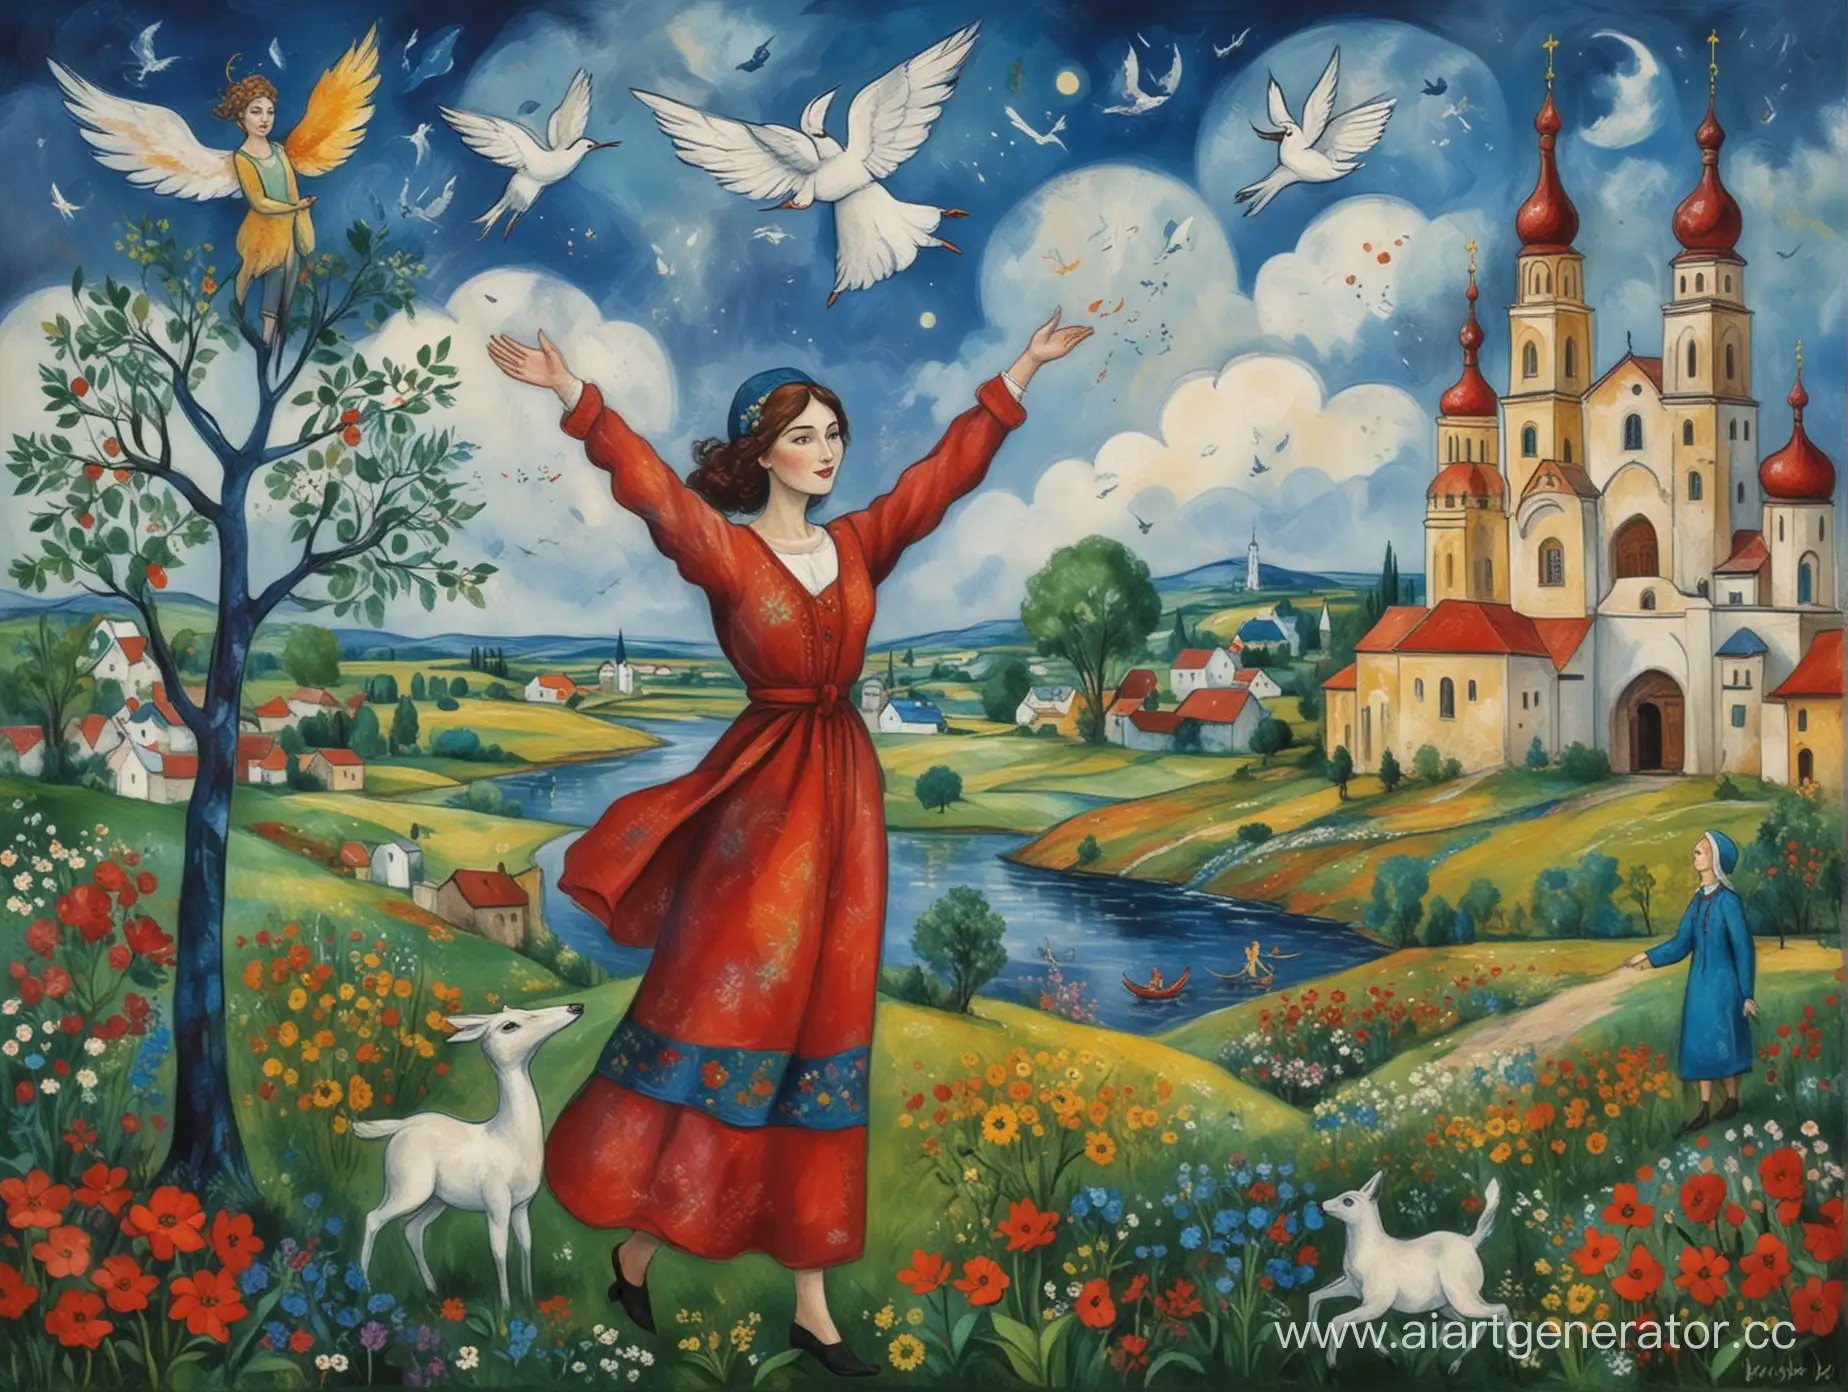 Whimsical-Depiction-of-a-Modern-Belarus-Inspired-by-Marc-Chagall